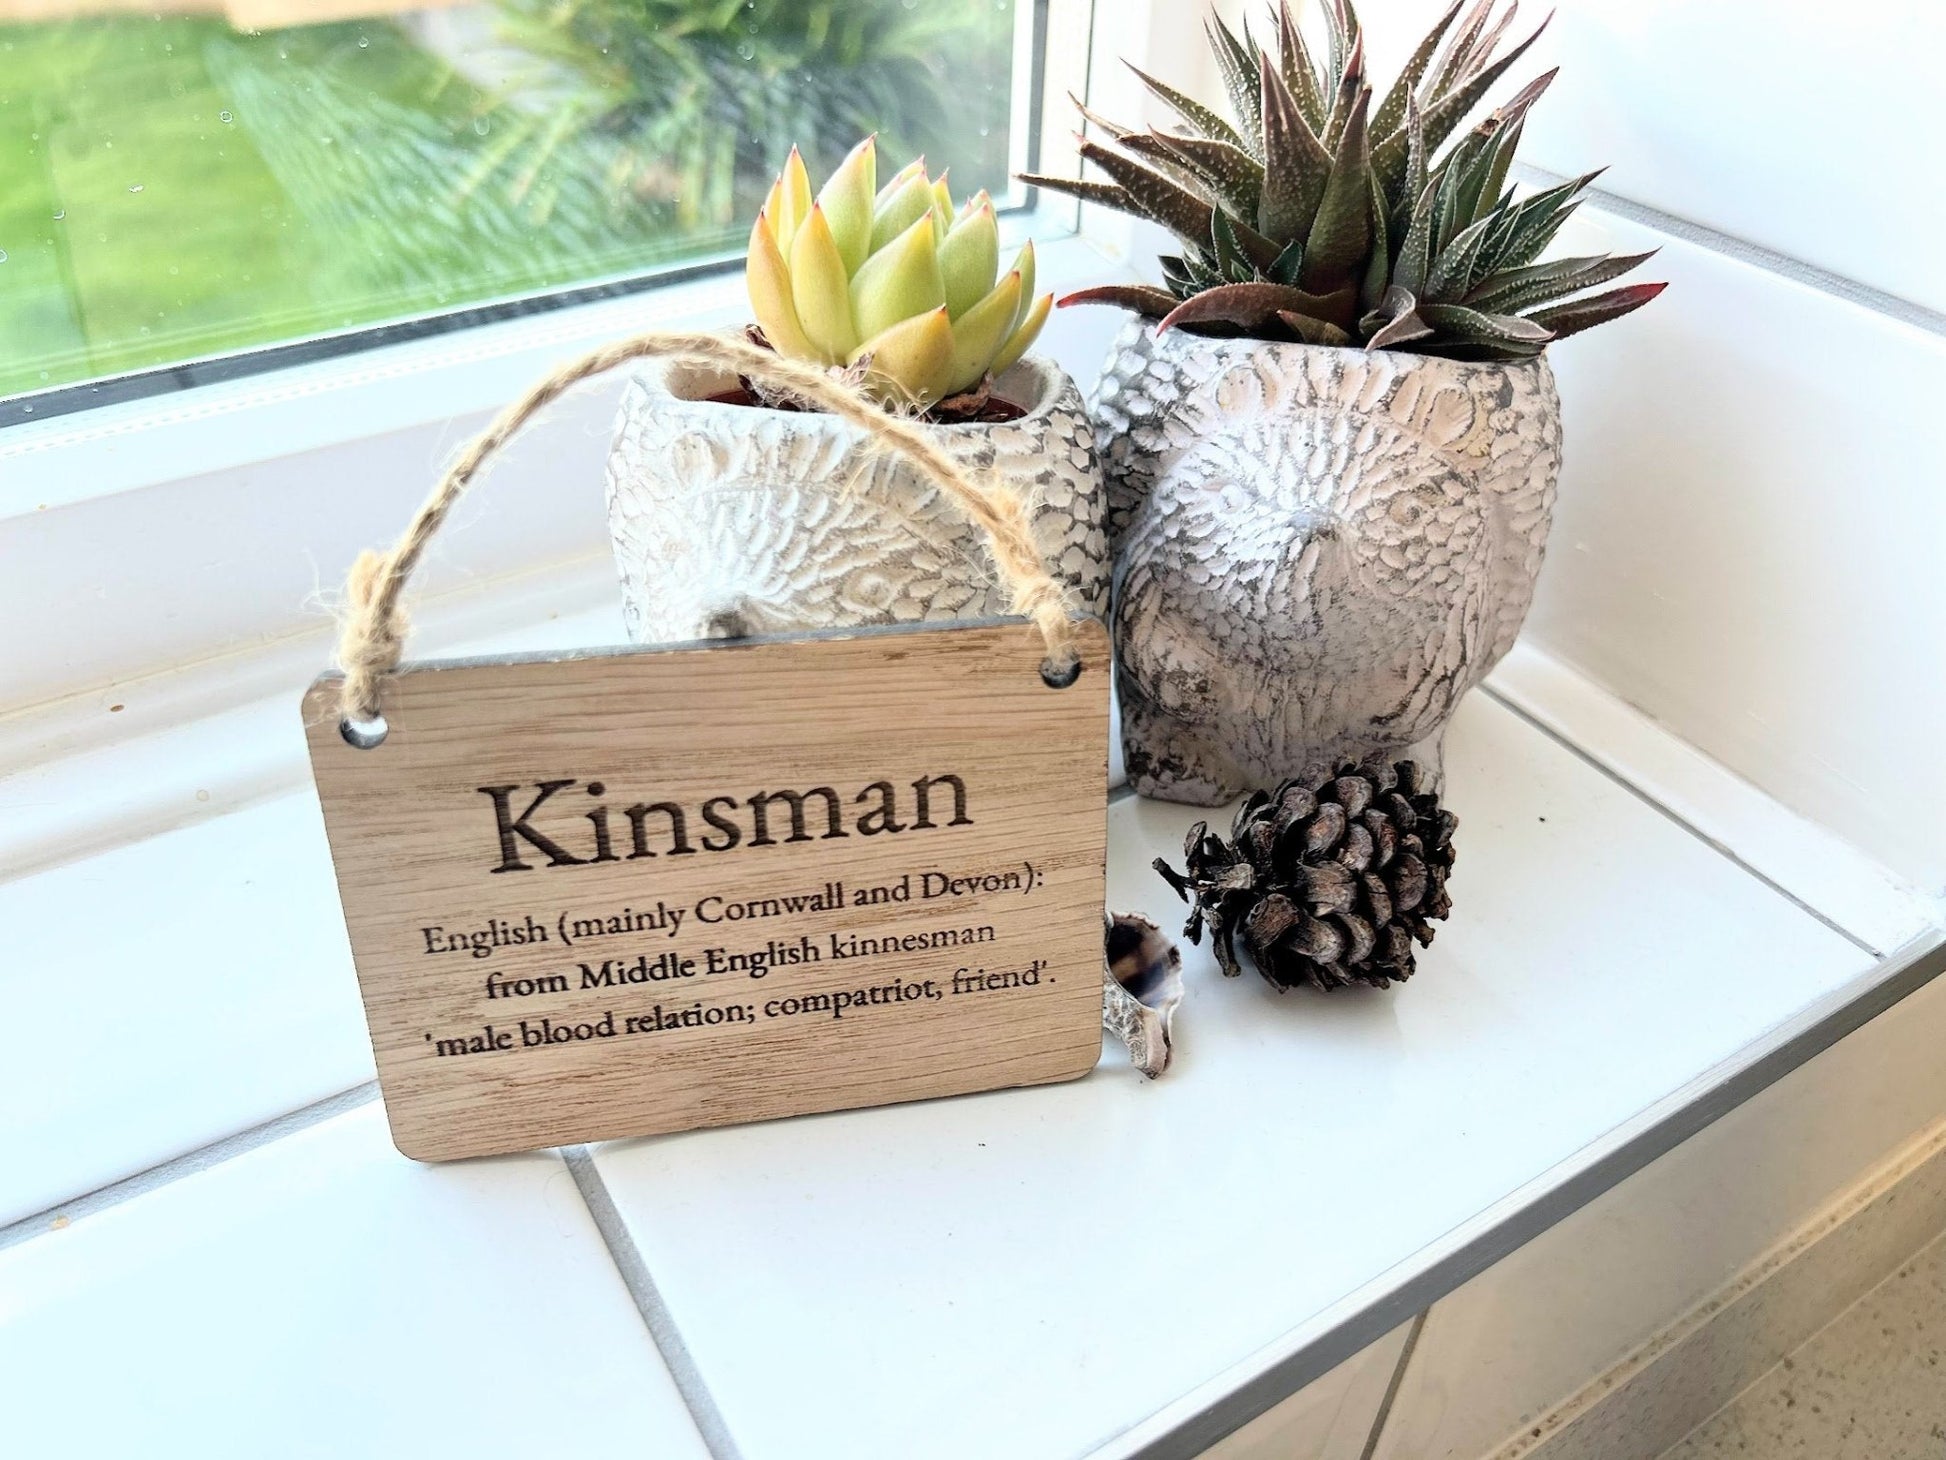 Surname Meaning and Origin Wooden Sign | Wooden Hanging Sign | Surname gift - CherryGroveCraft